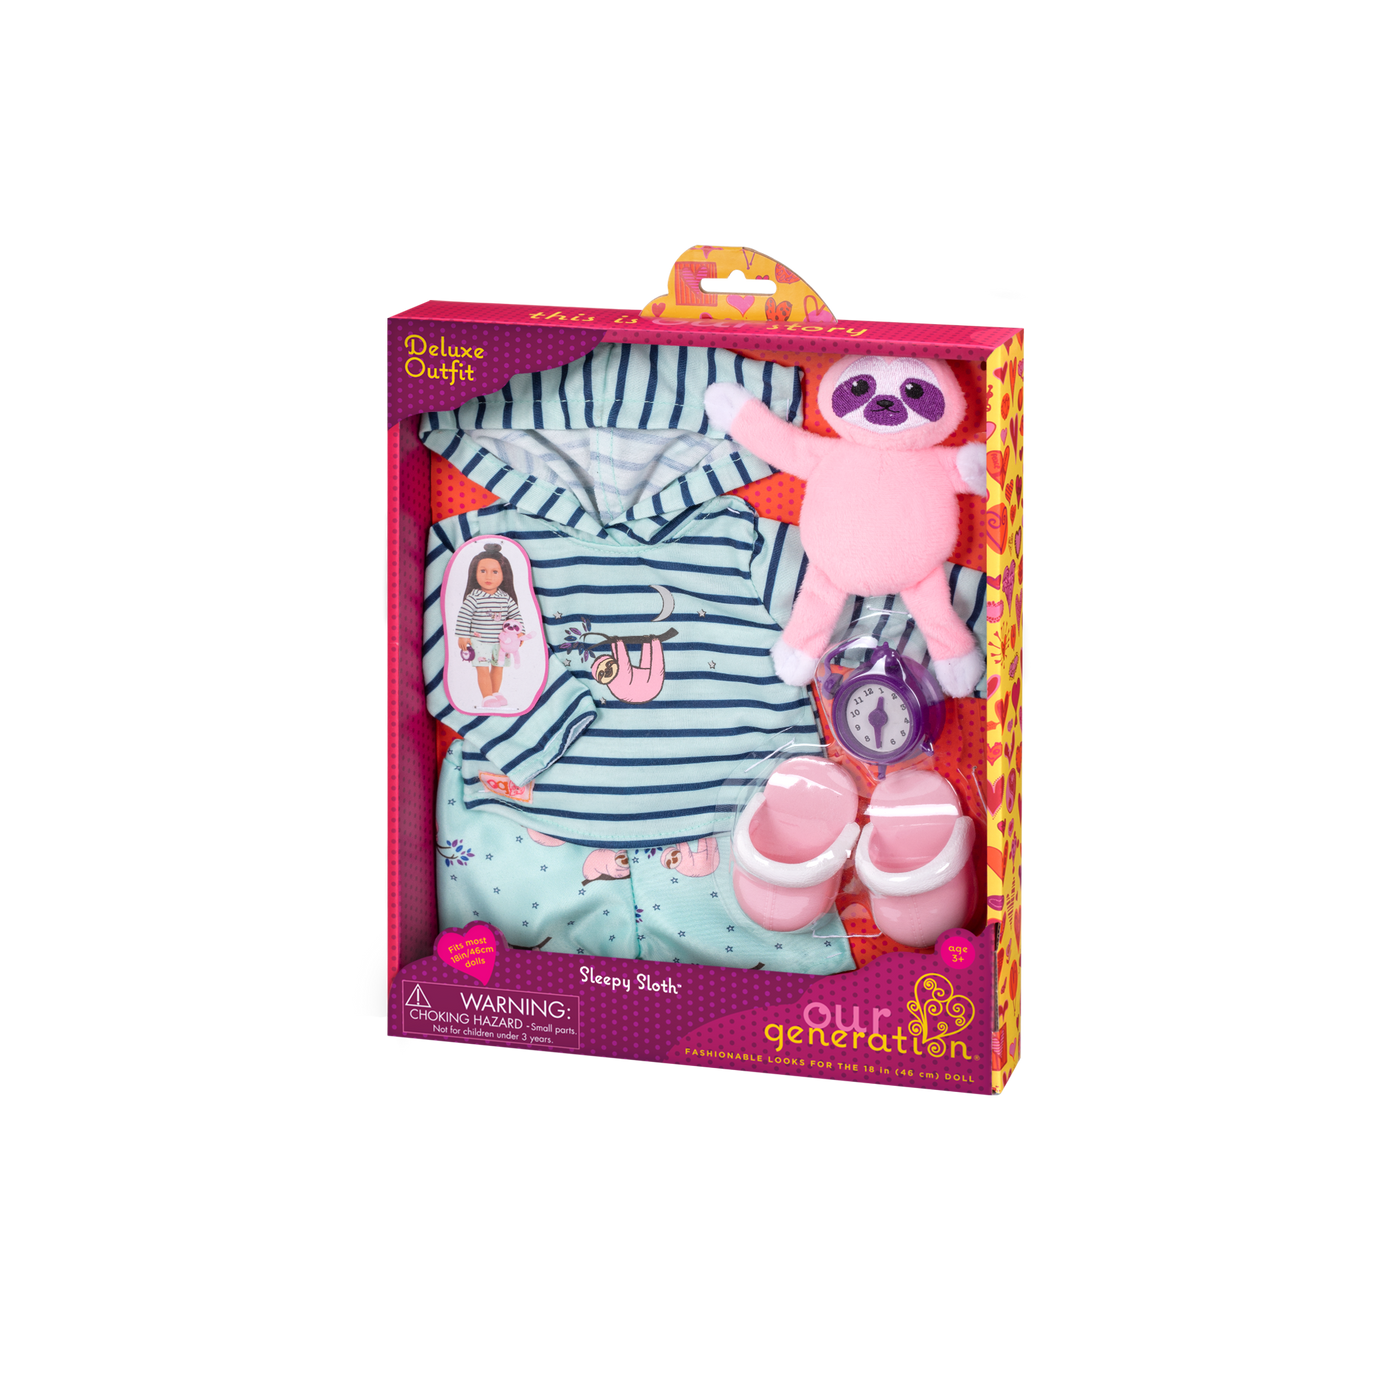 Sloth-themed pajamas with sloth plushie and alarm clock for 18-inch doll